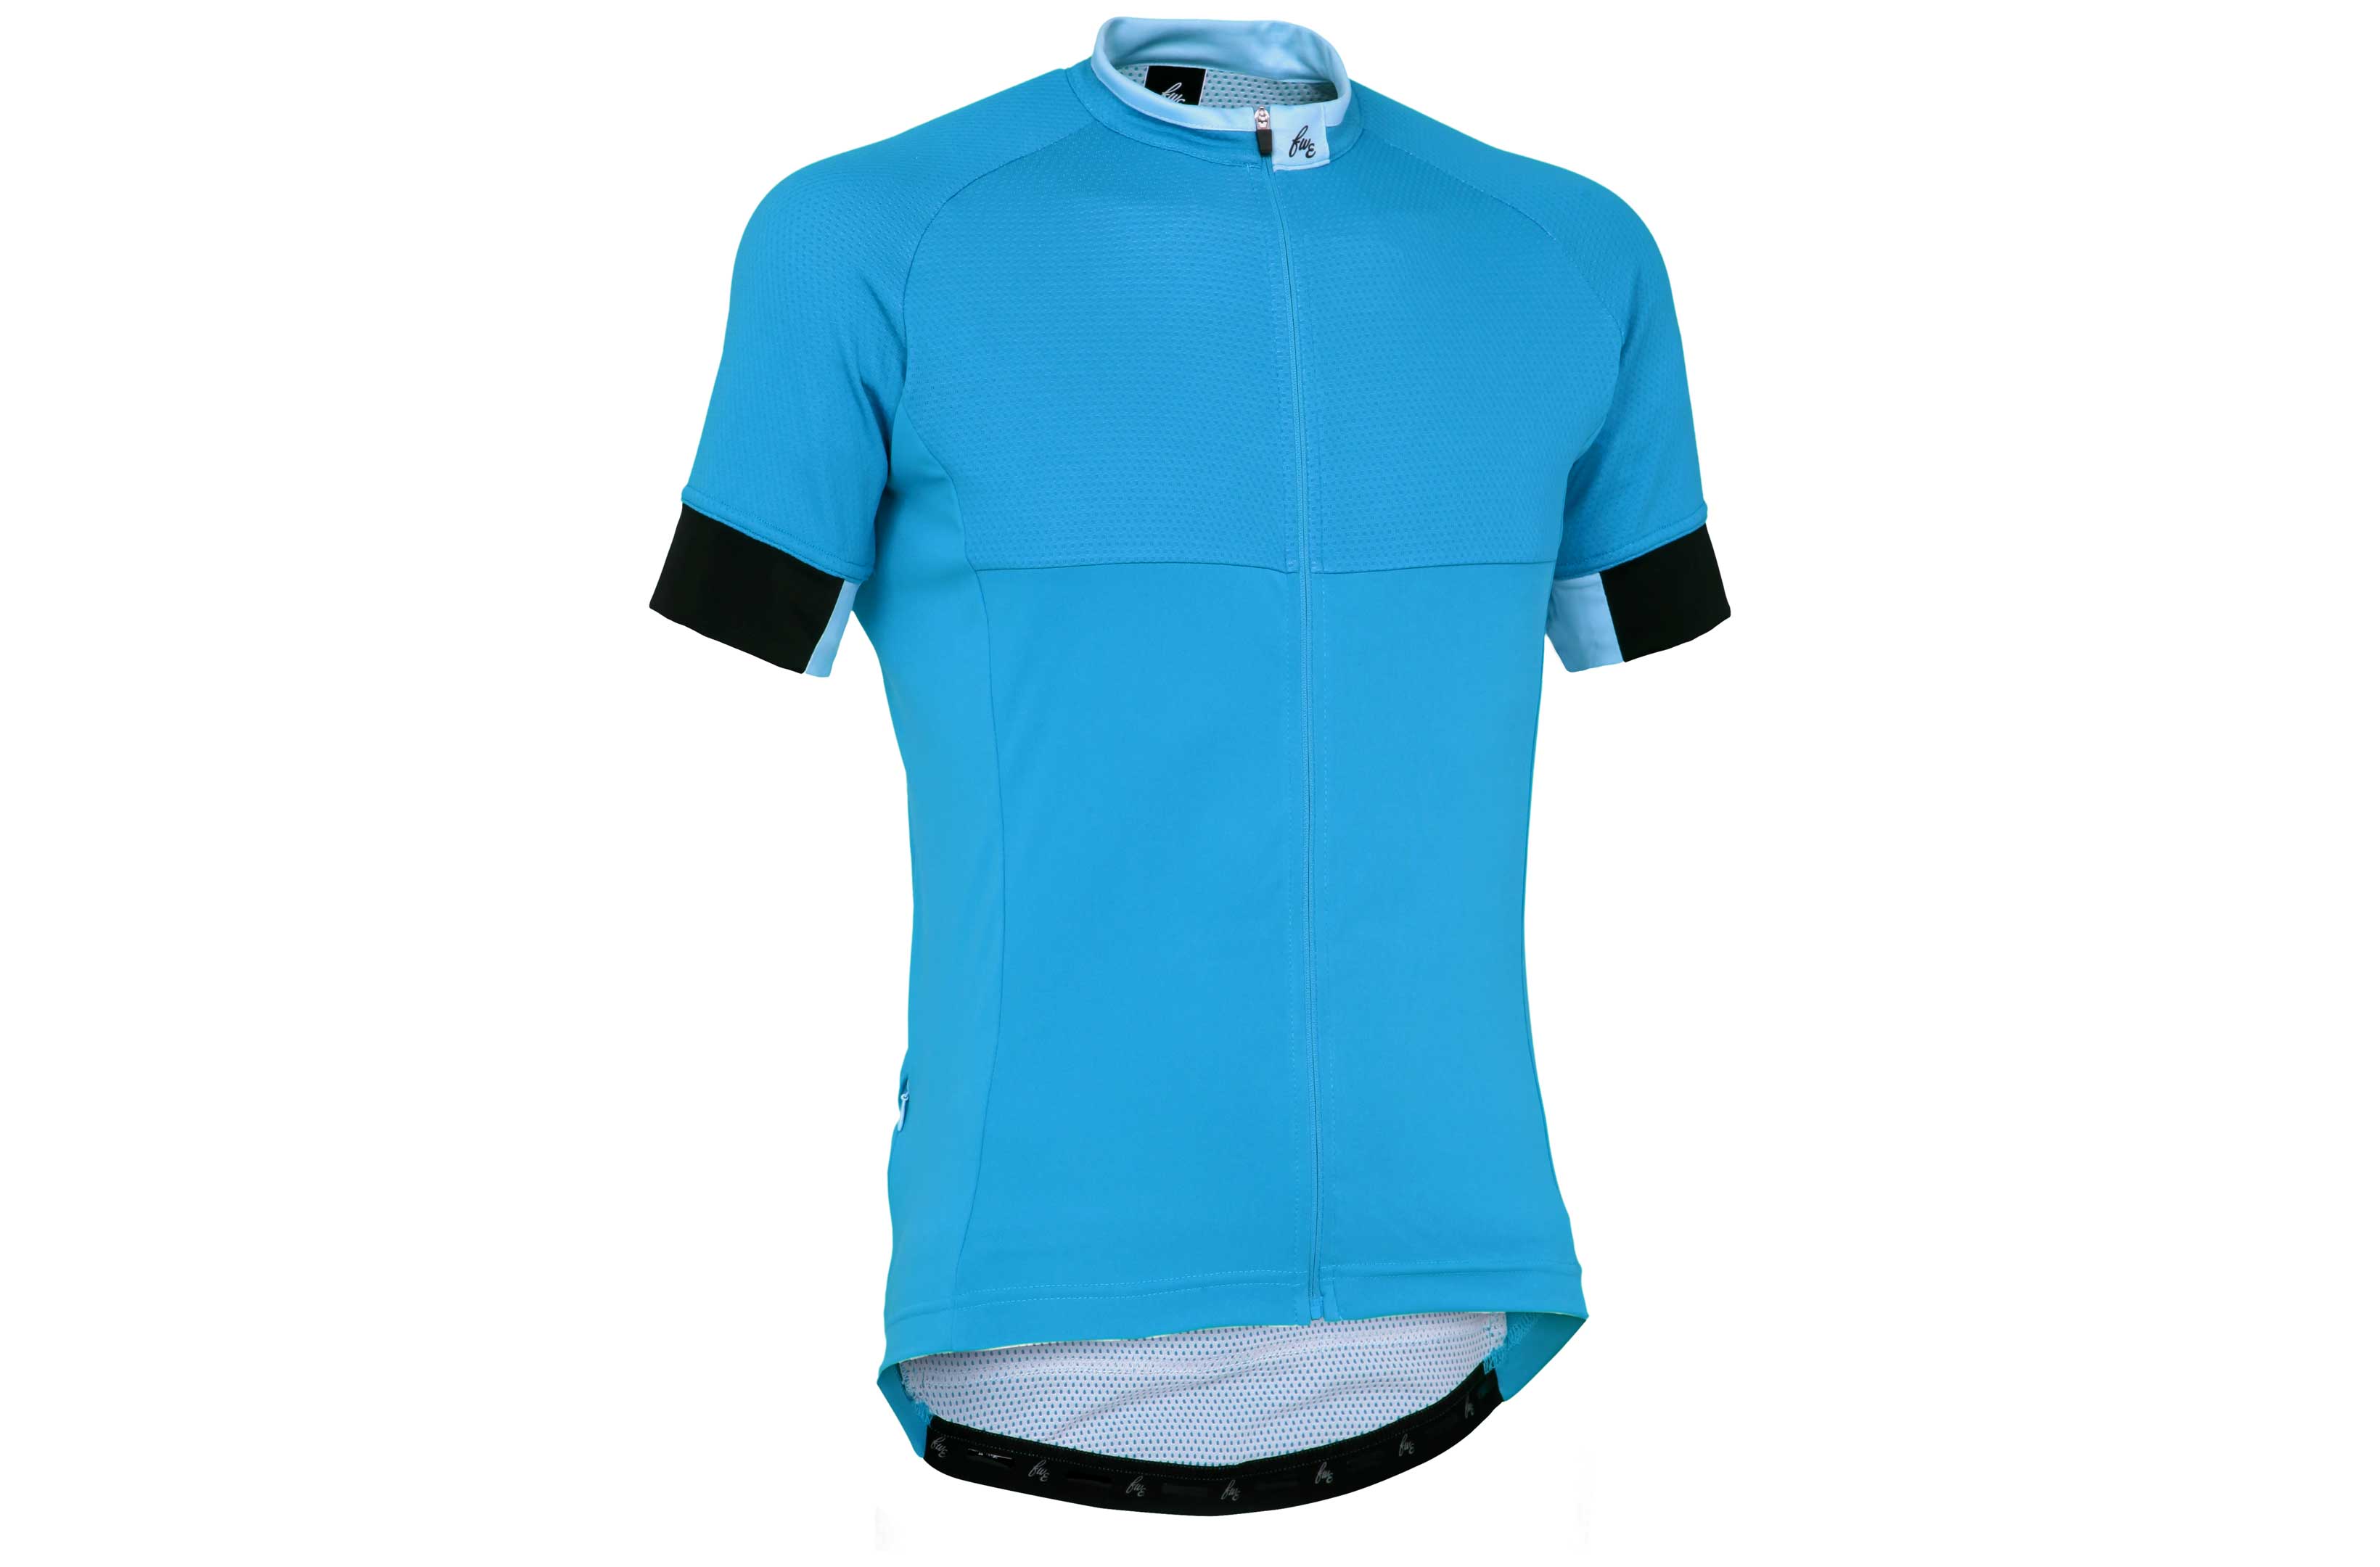 Evans Cycles unveil own range of affordable cycle clothing | road.cc